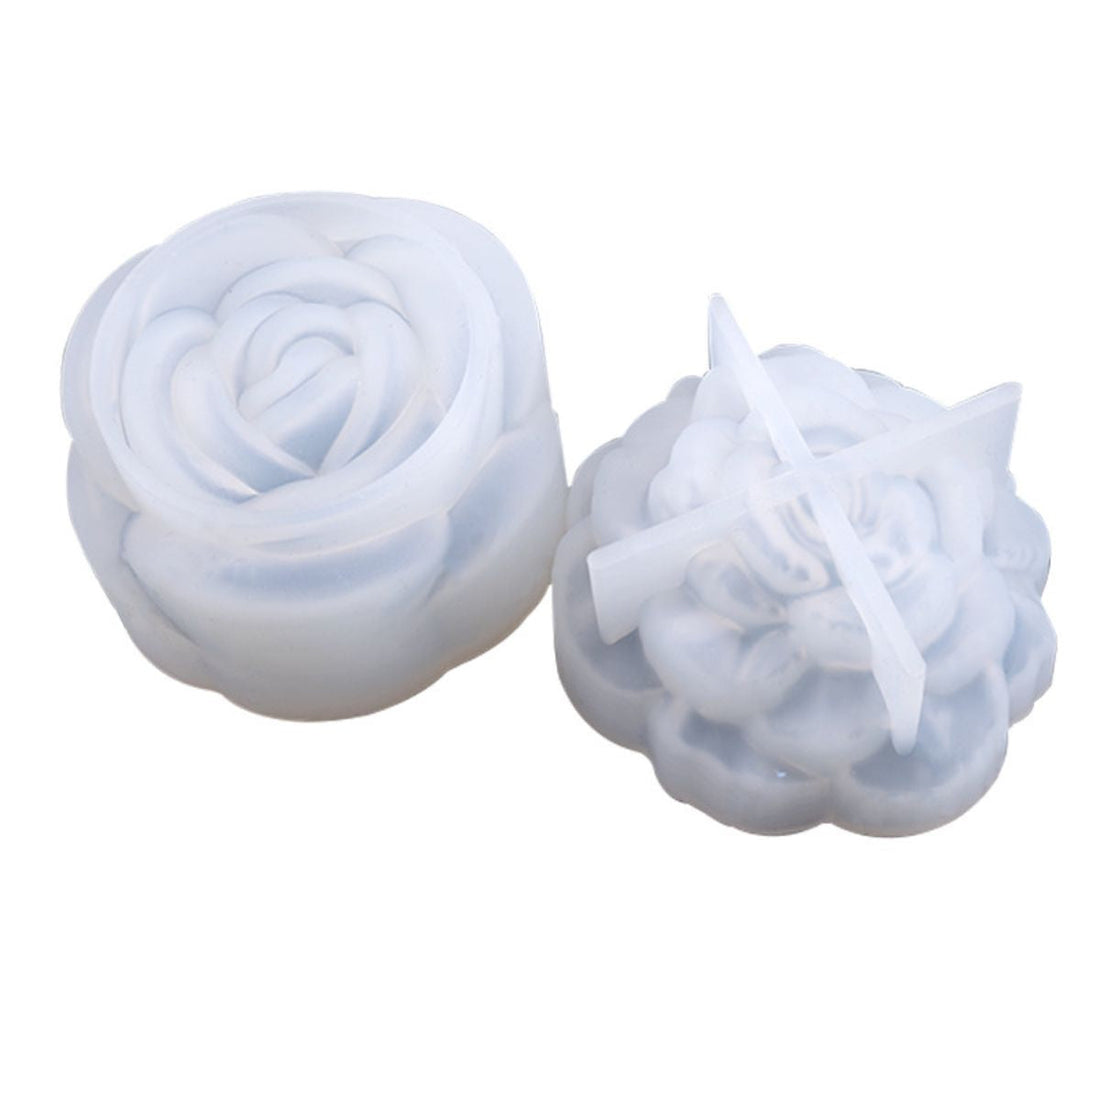 rose flower silicone mold in 2 different sizes